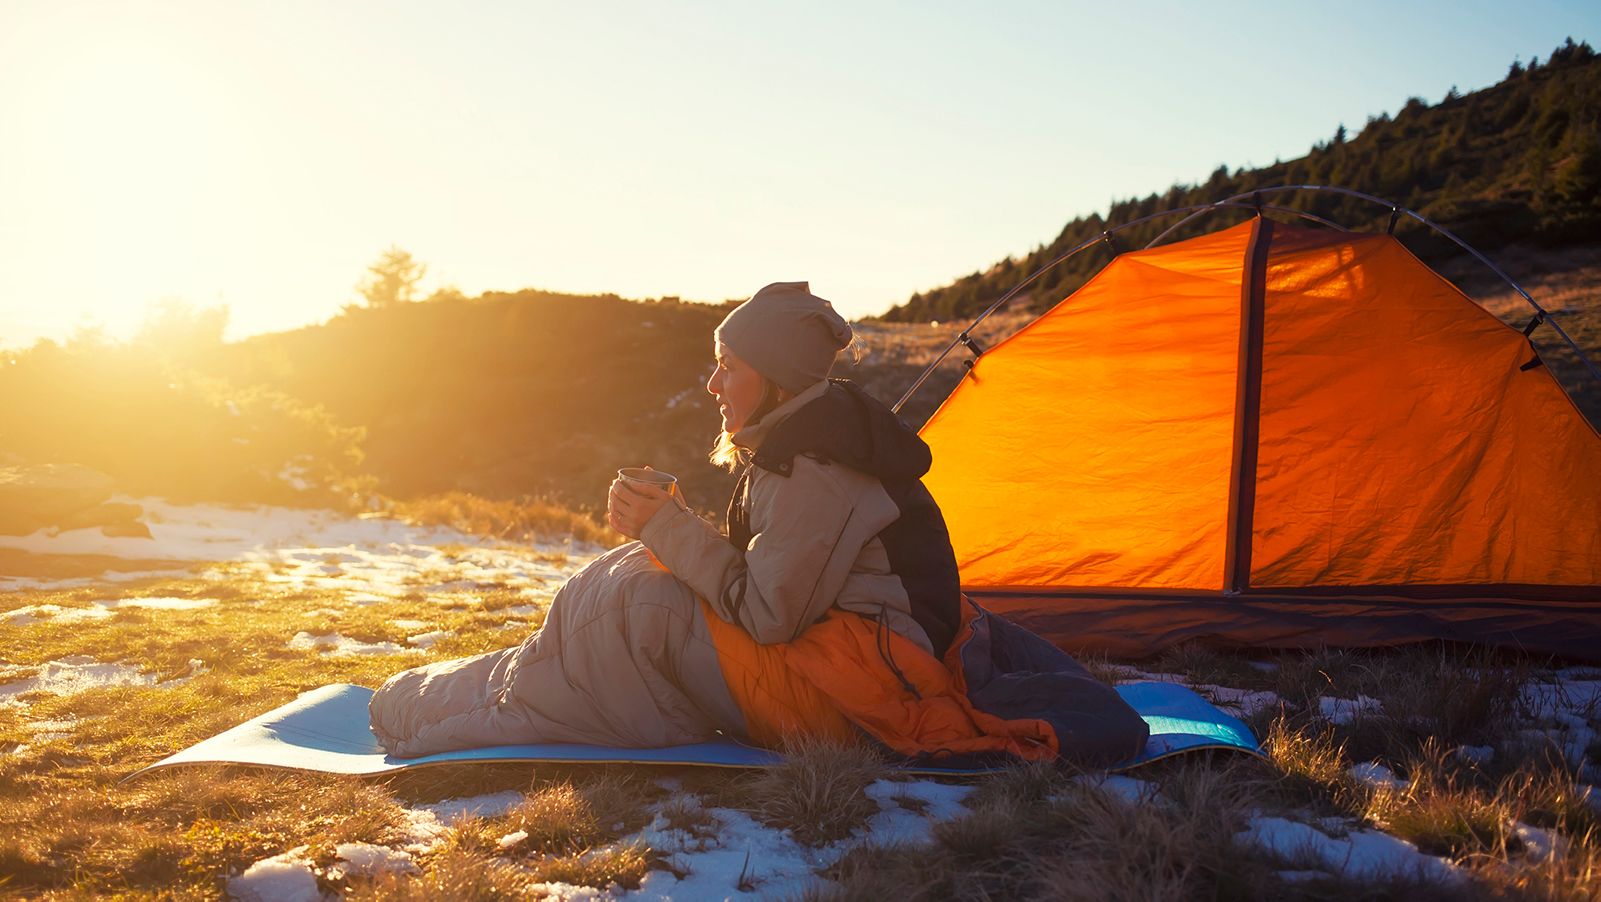 How to Keep Food Cold While Camping - Beyond The Tent